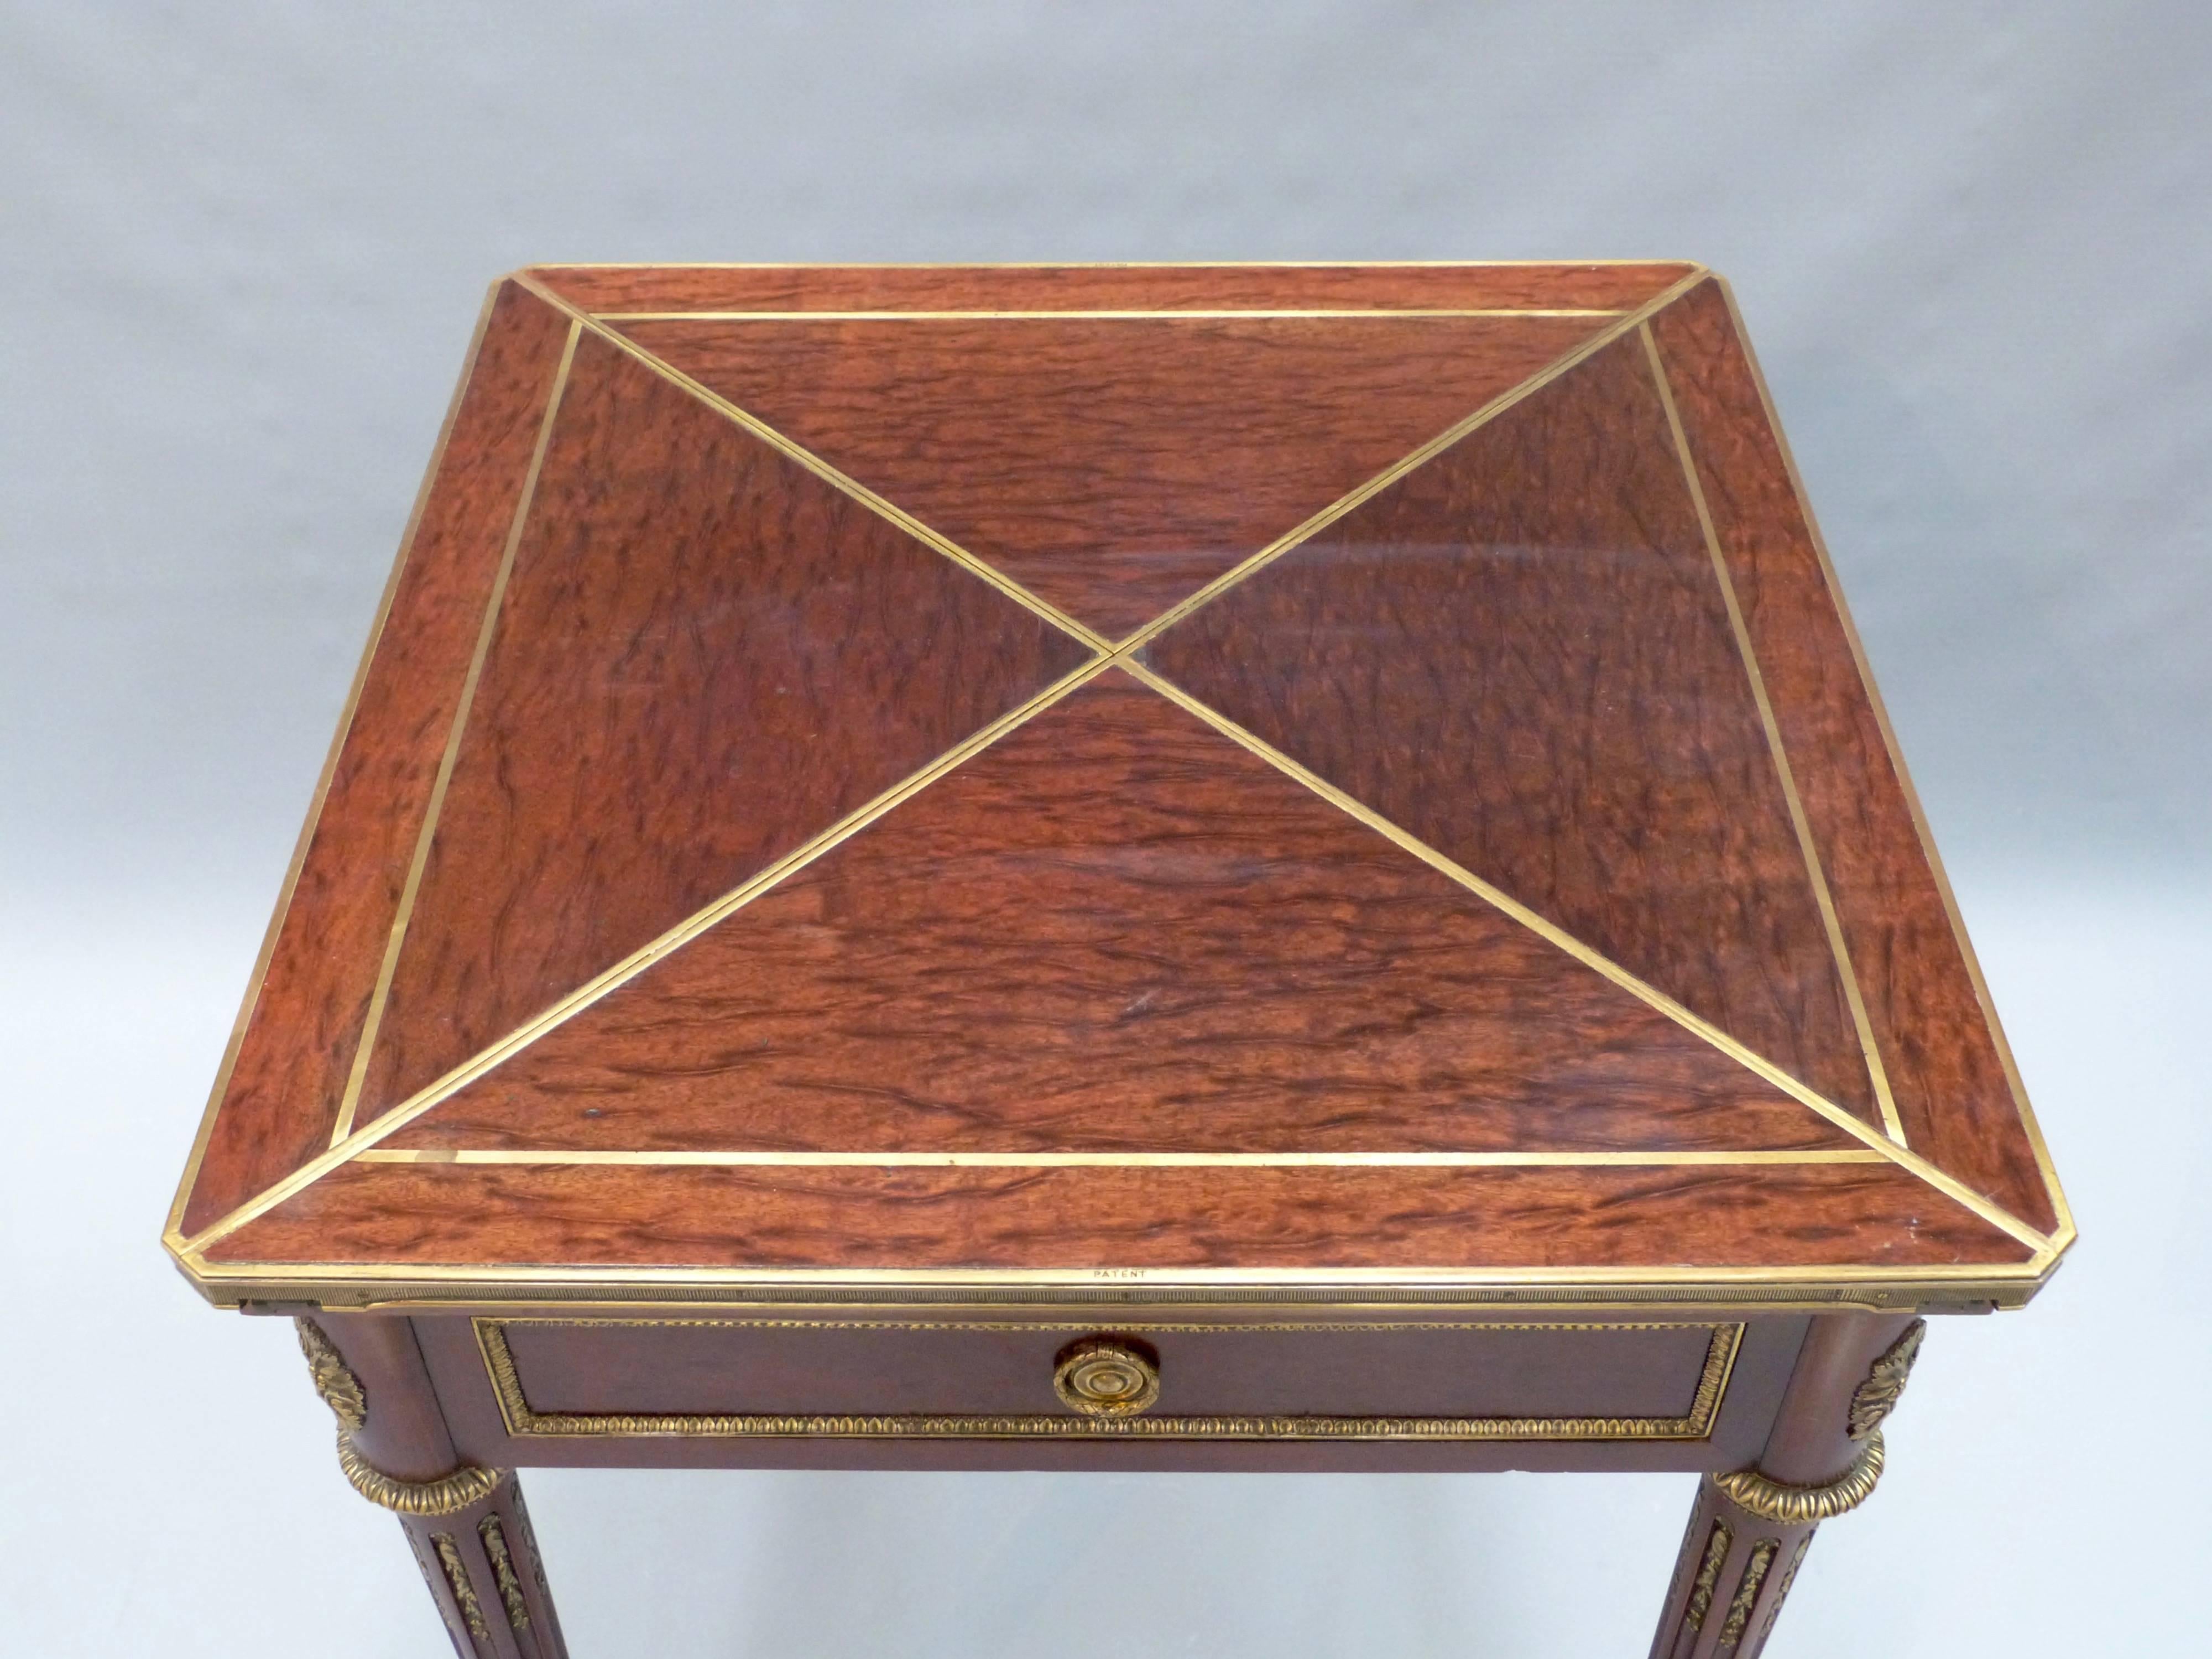 A French Louis XVI style envelope card table with gilt mounts to the turned fluted legs and top with plum pudding mahogany panels, circa 1890.